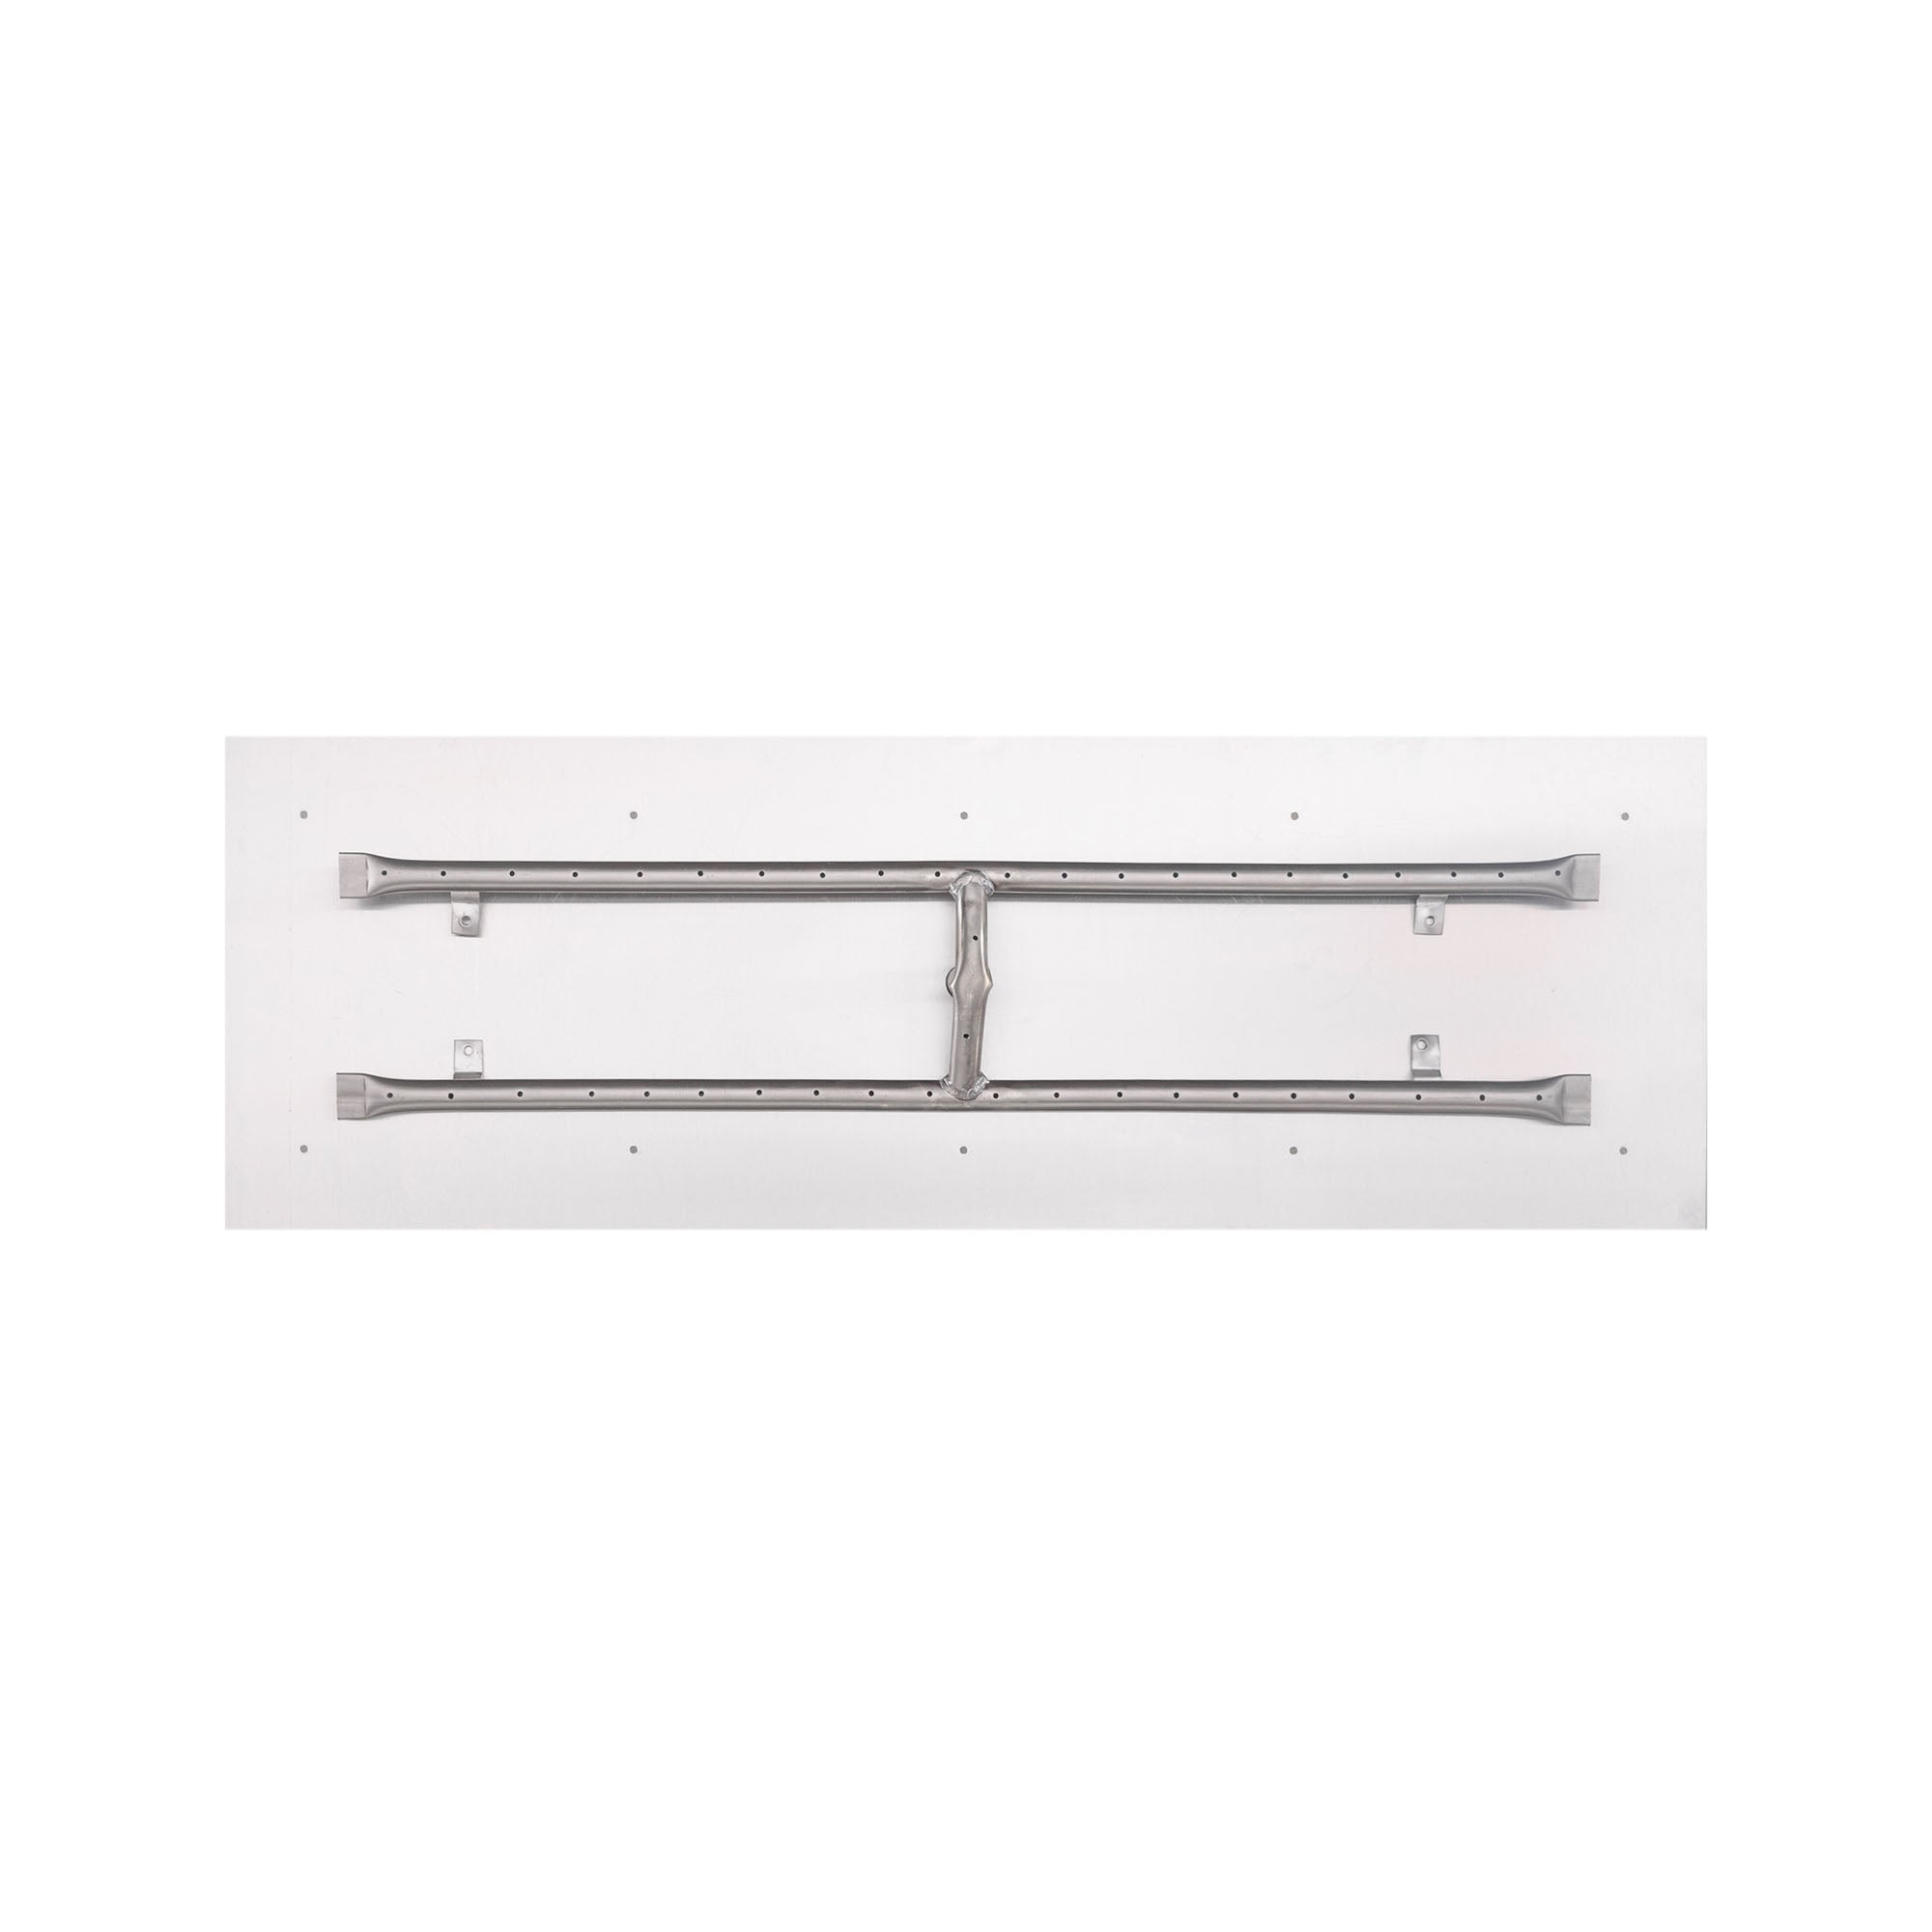 The Outdoor Plus - 84 Inch Rectangle Stainless Steel Pan and 72 Inch H-Burner - OPT-REFD1284